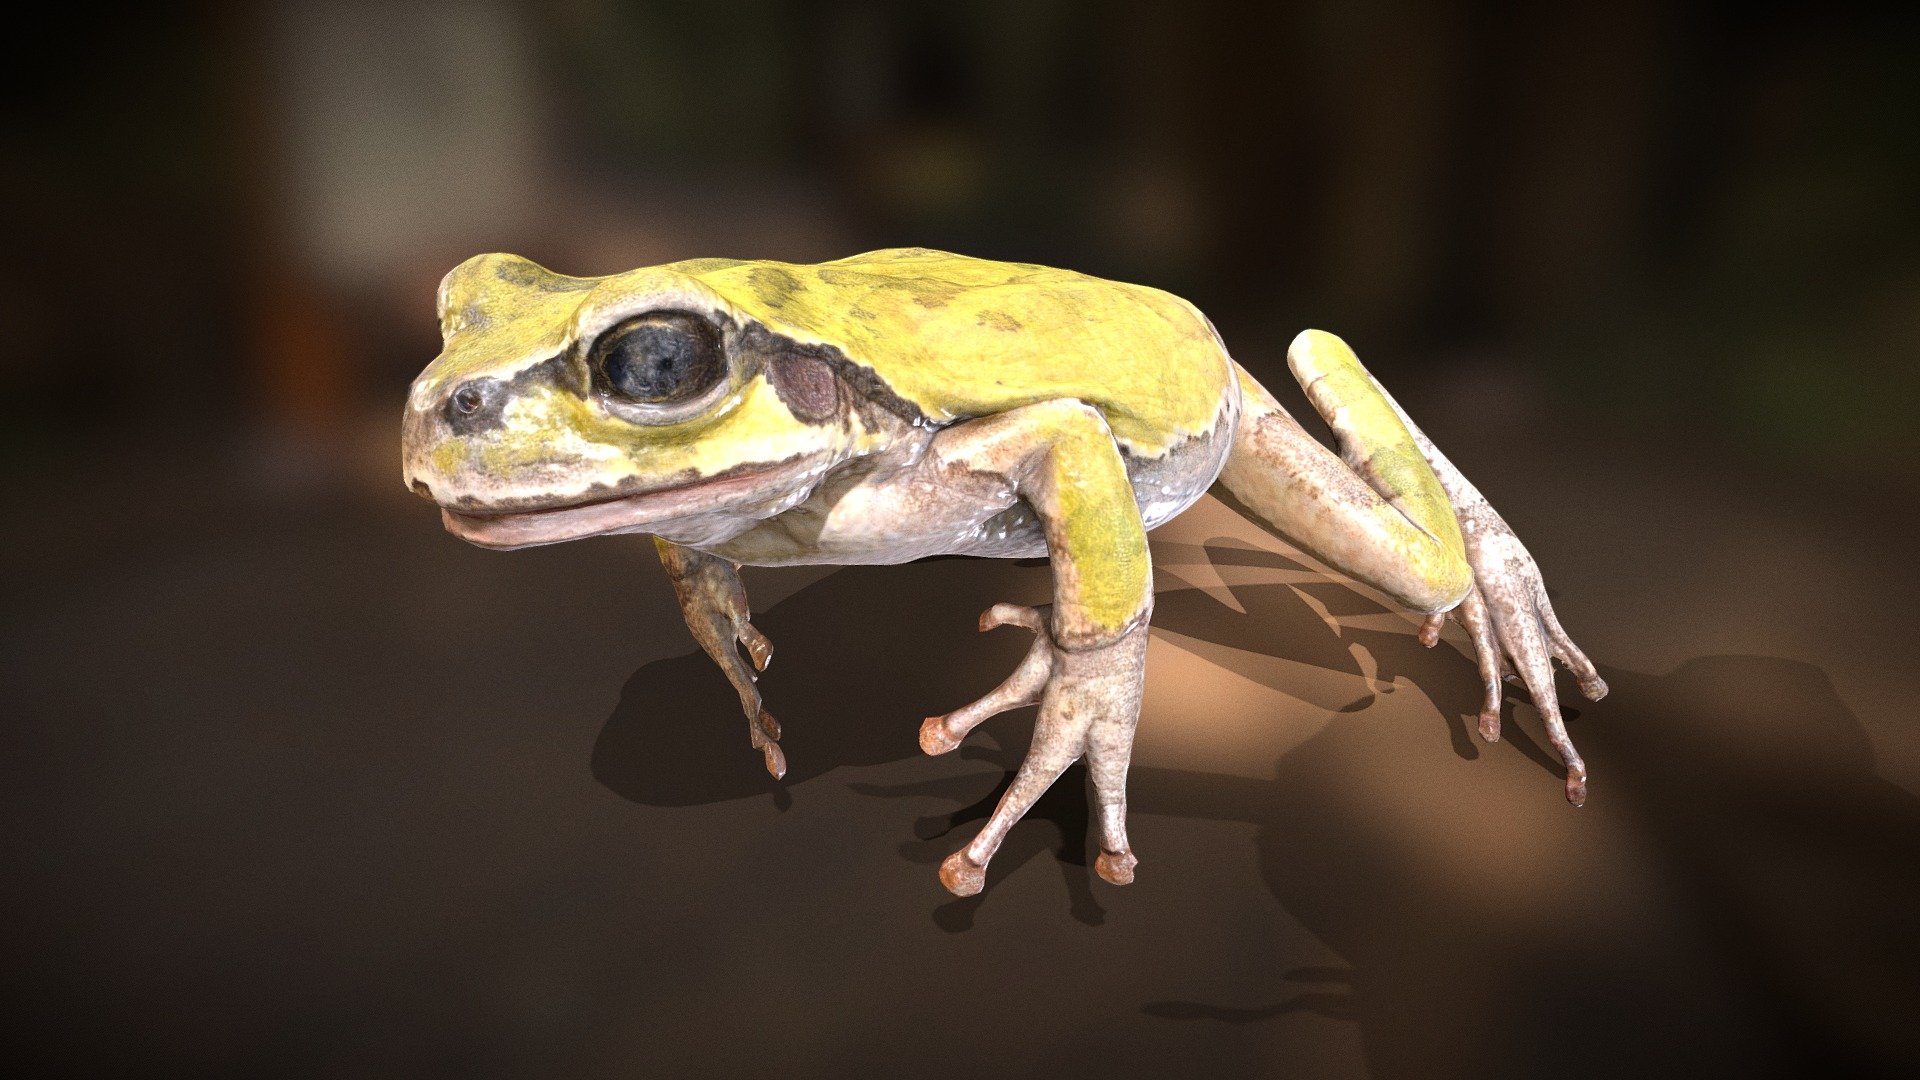 This is a very good quality Japanese Rain Frog model 3d model